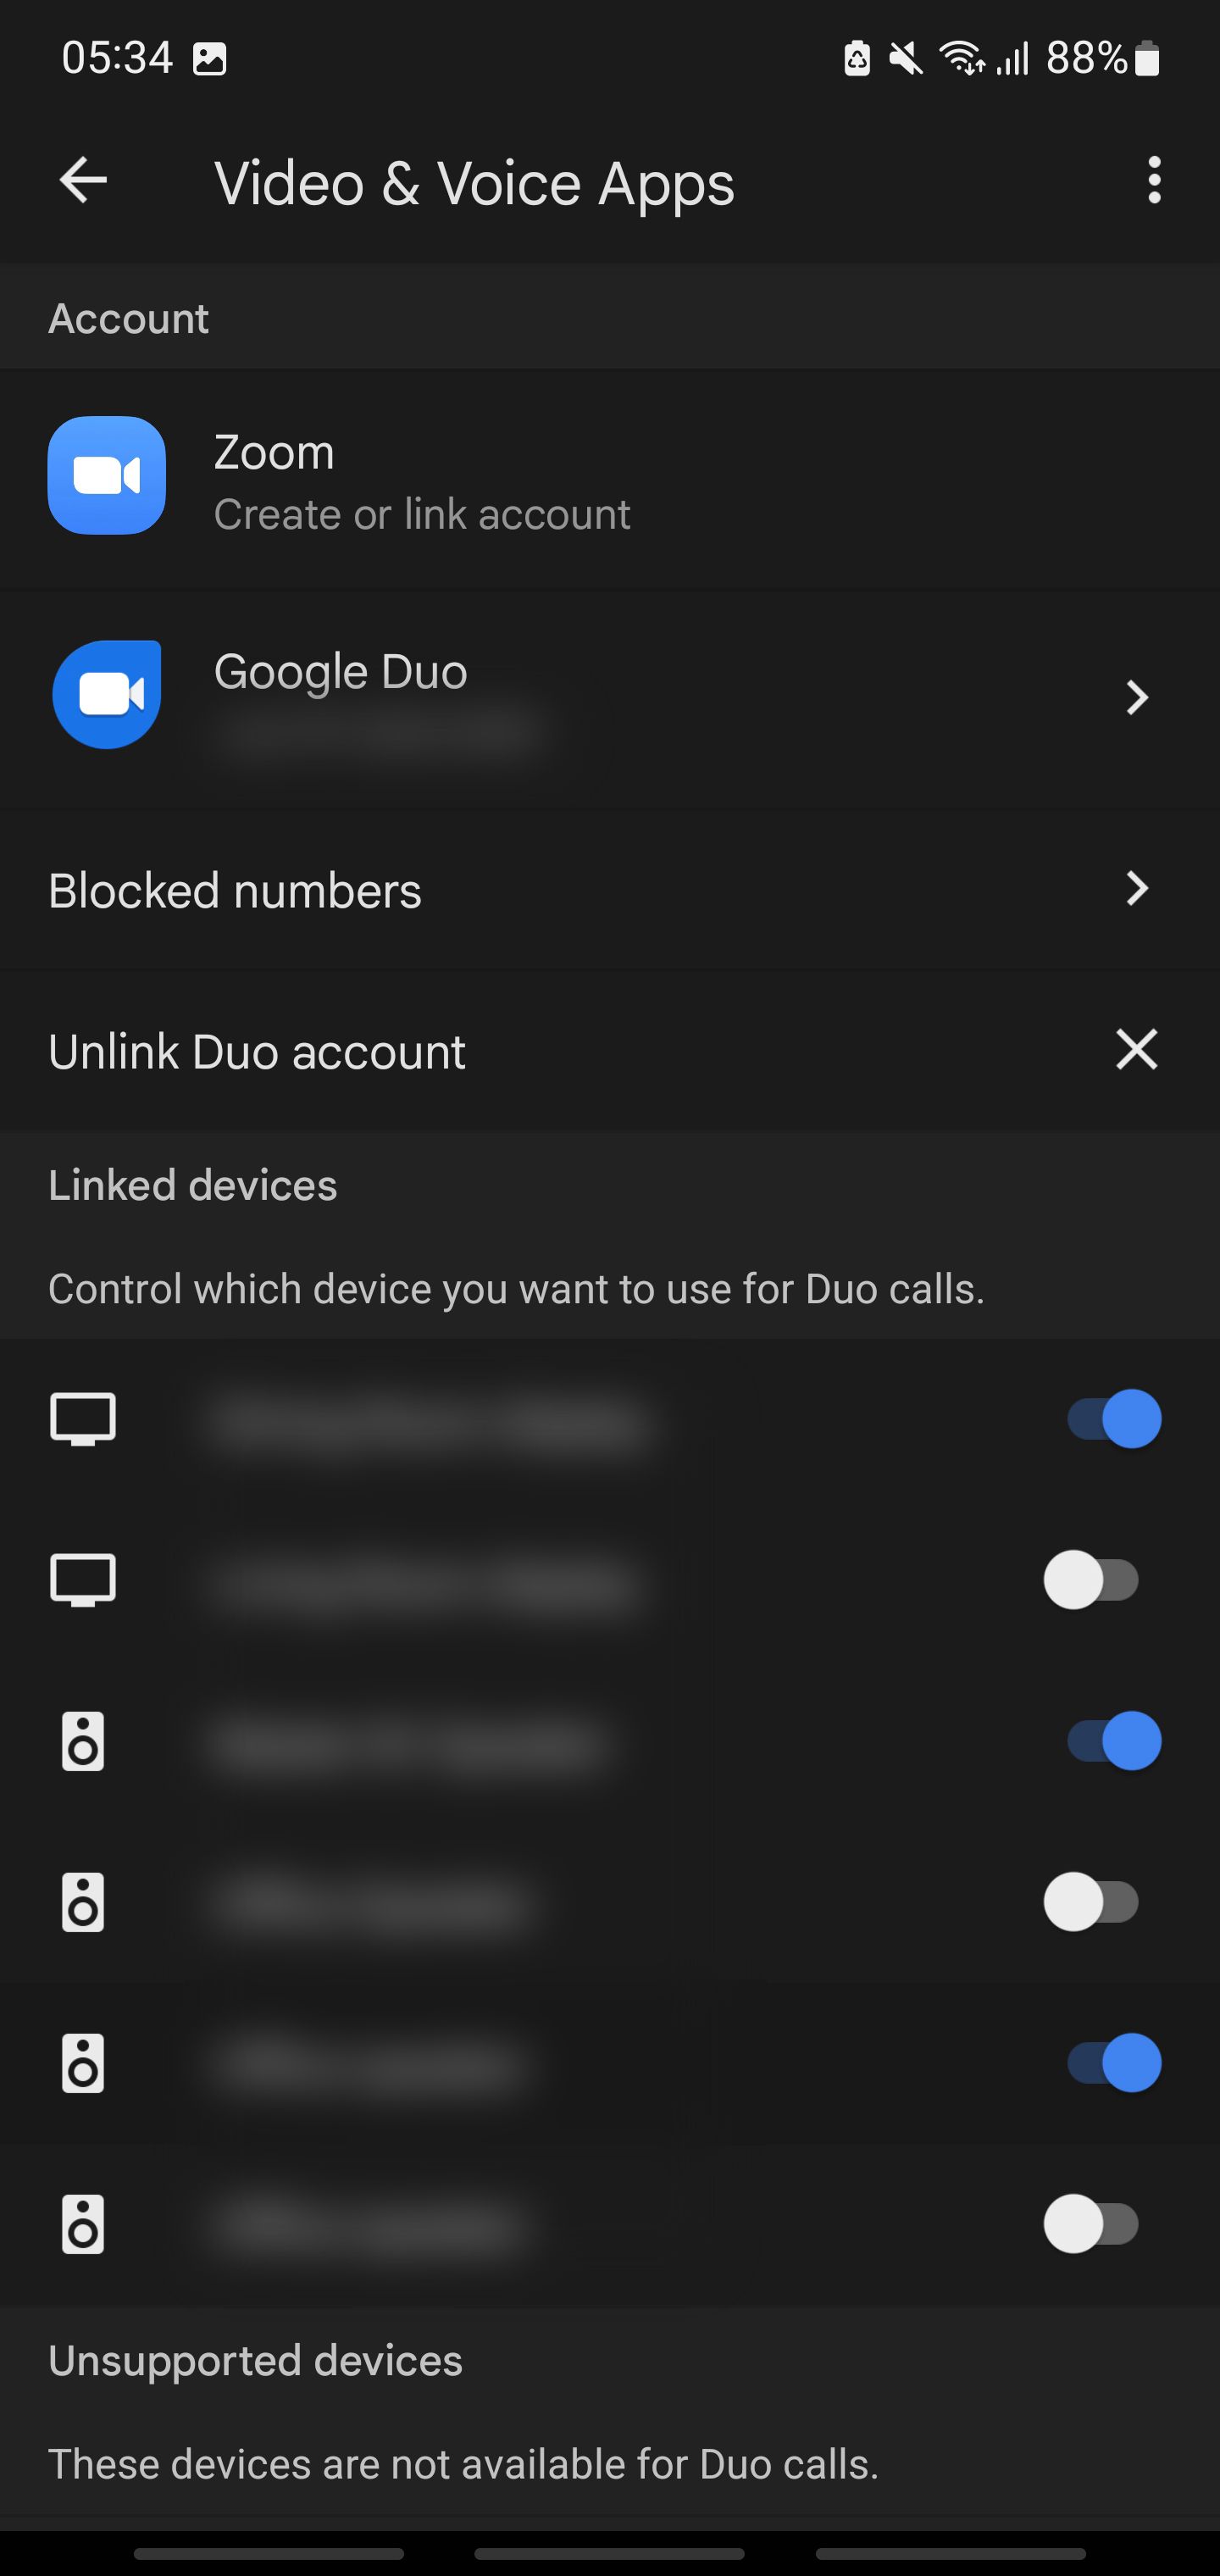 Google Video and voice app settings